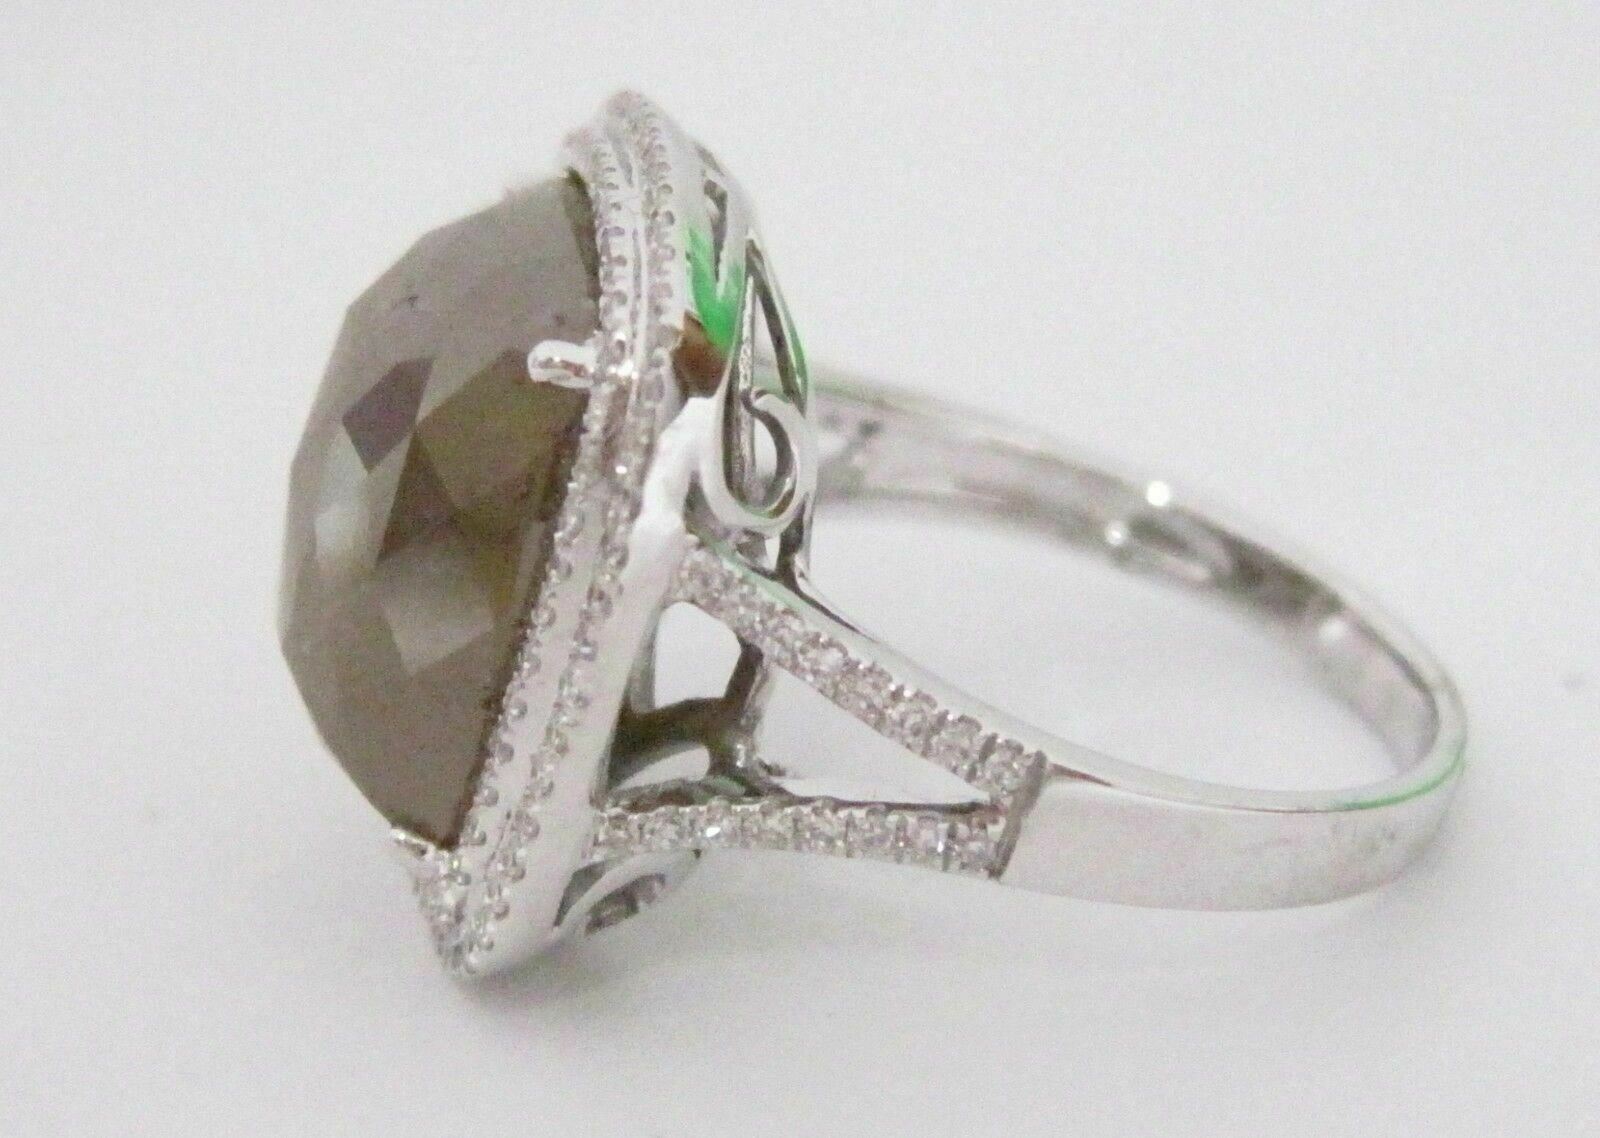 7.83 TCW Natural Solitaire Cushion Facet Colored Diamond Ring 14k W/G Size 6.5